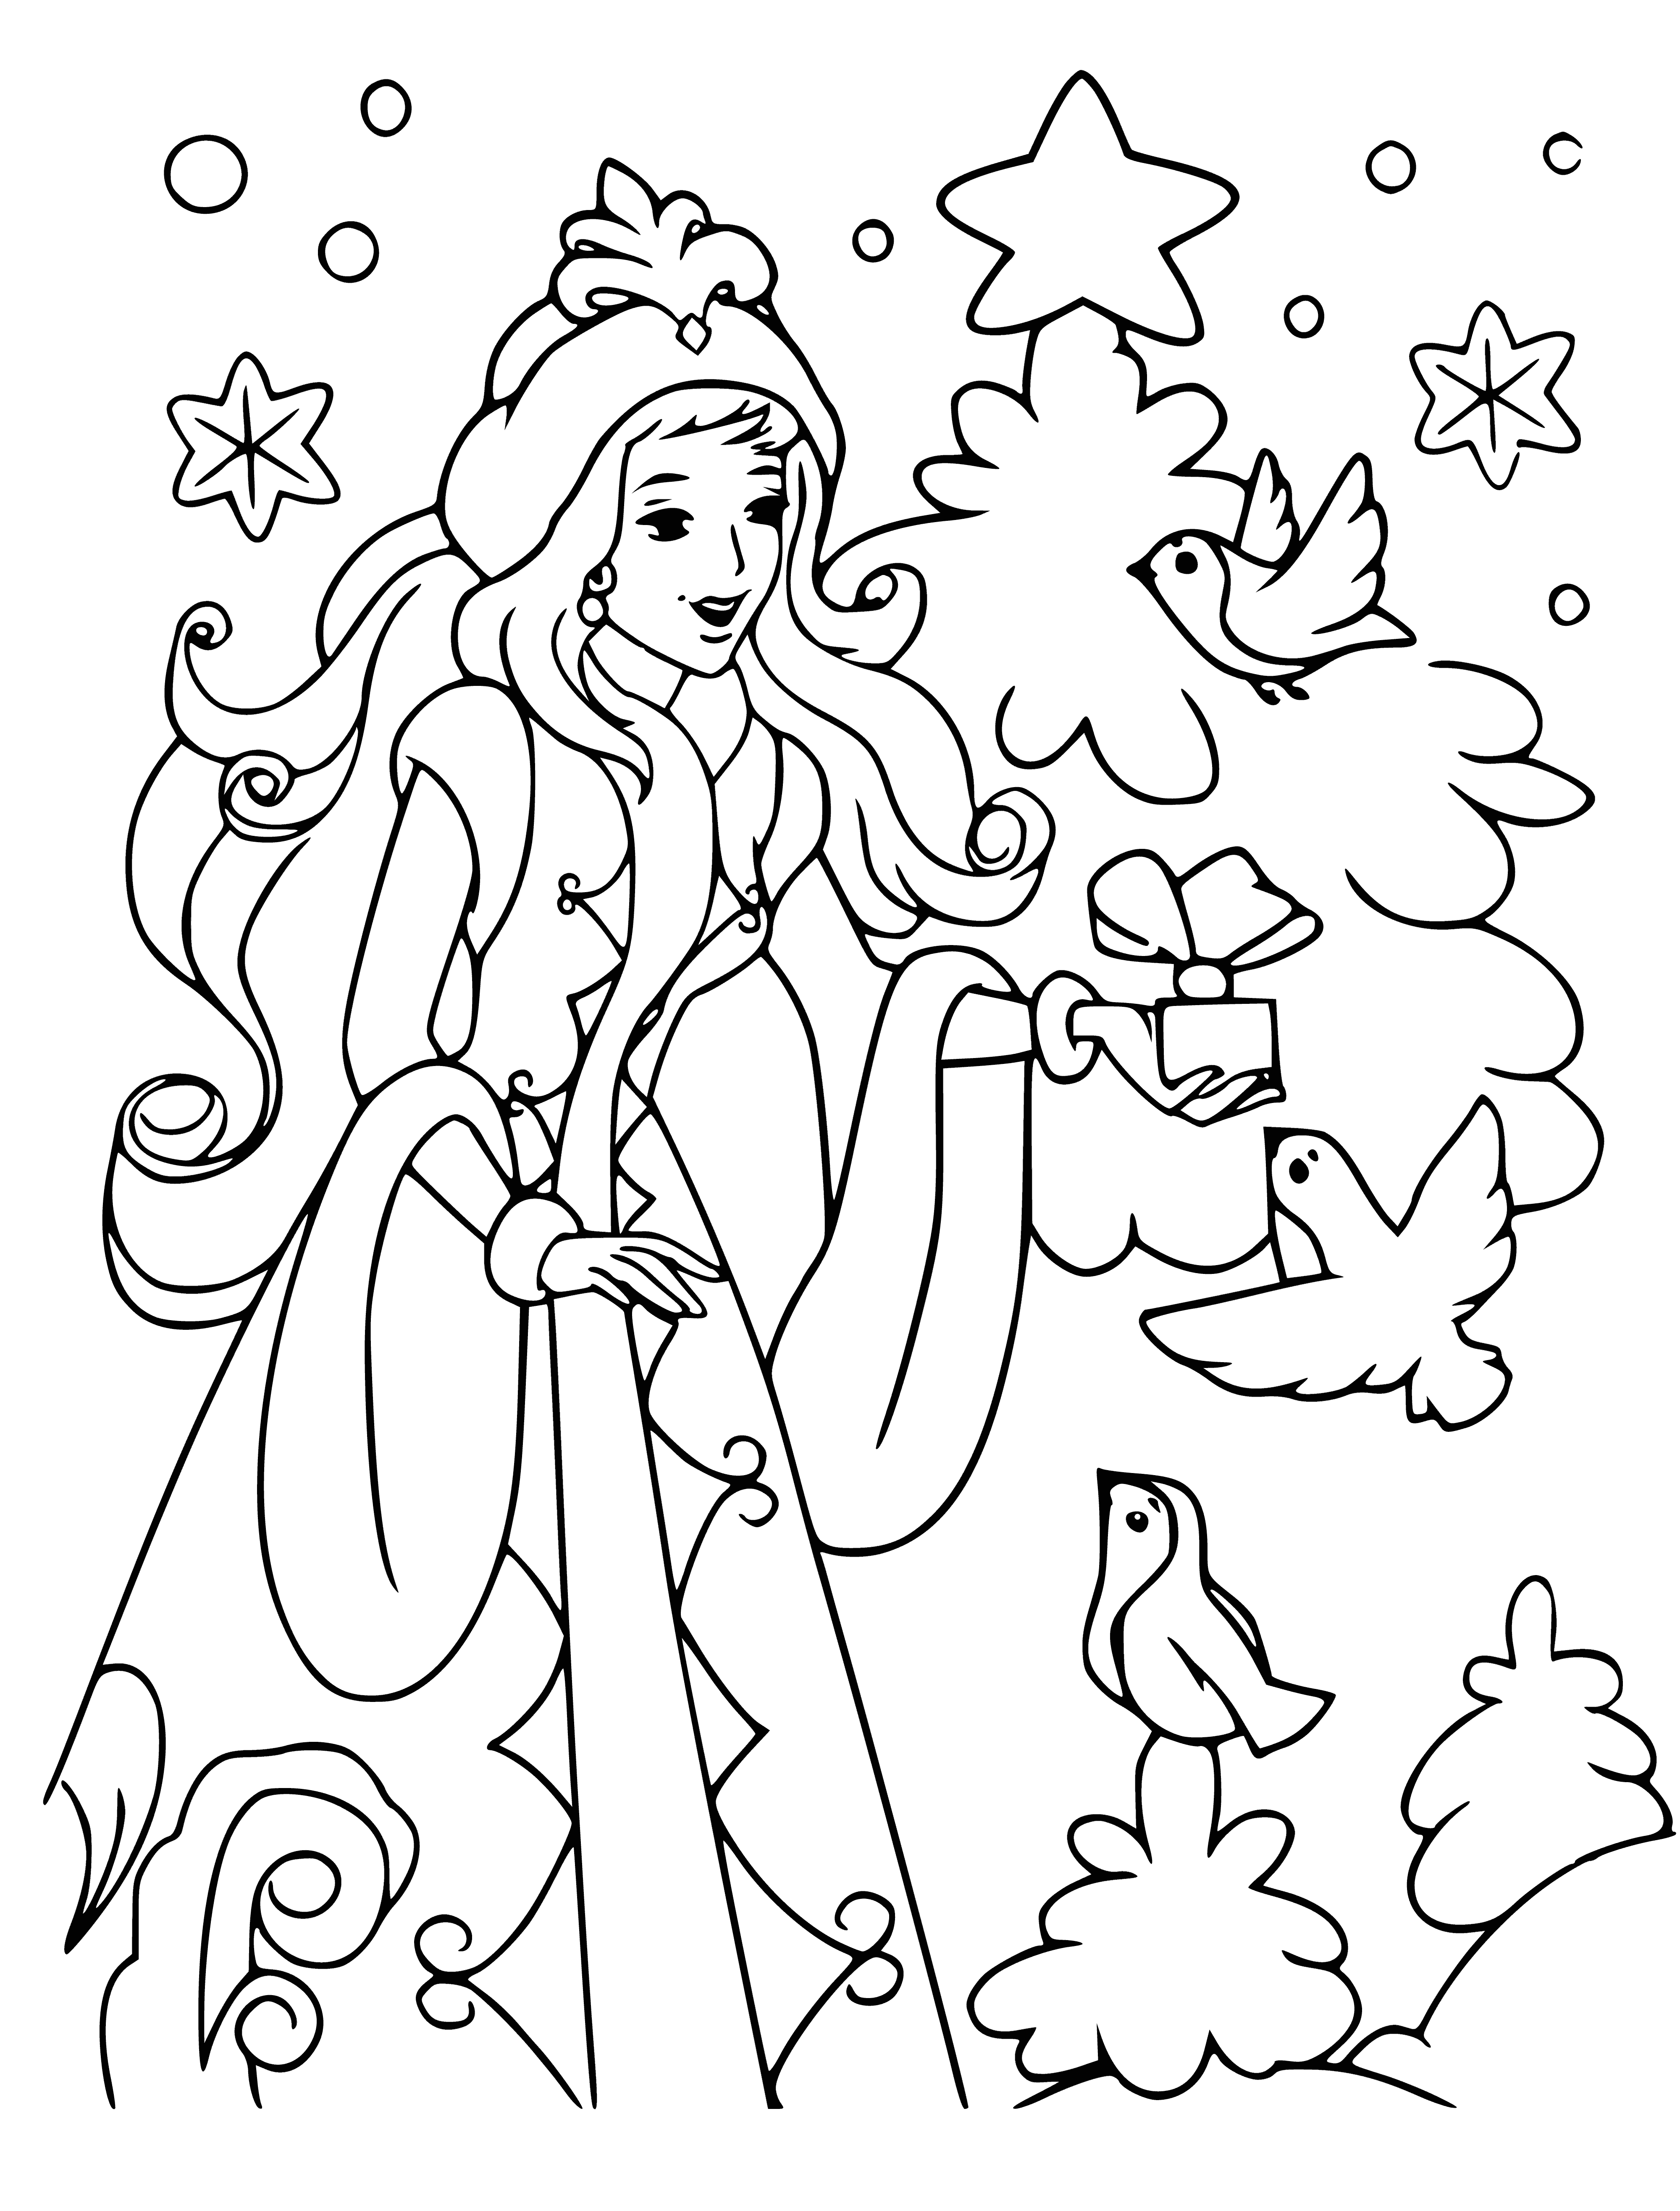 coloring page: Snow Maiden stands in a winter wonderland, smiling & holding a white bird, w/ snowflakes falling. Her head is adorned w/ silver leaves wreath & she wears a long blue dress, white fur coat, & red scarf.